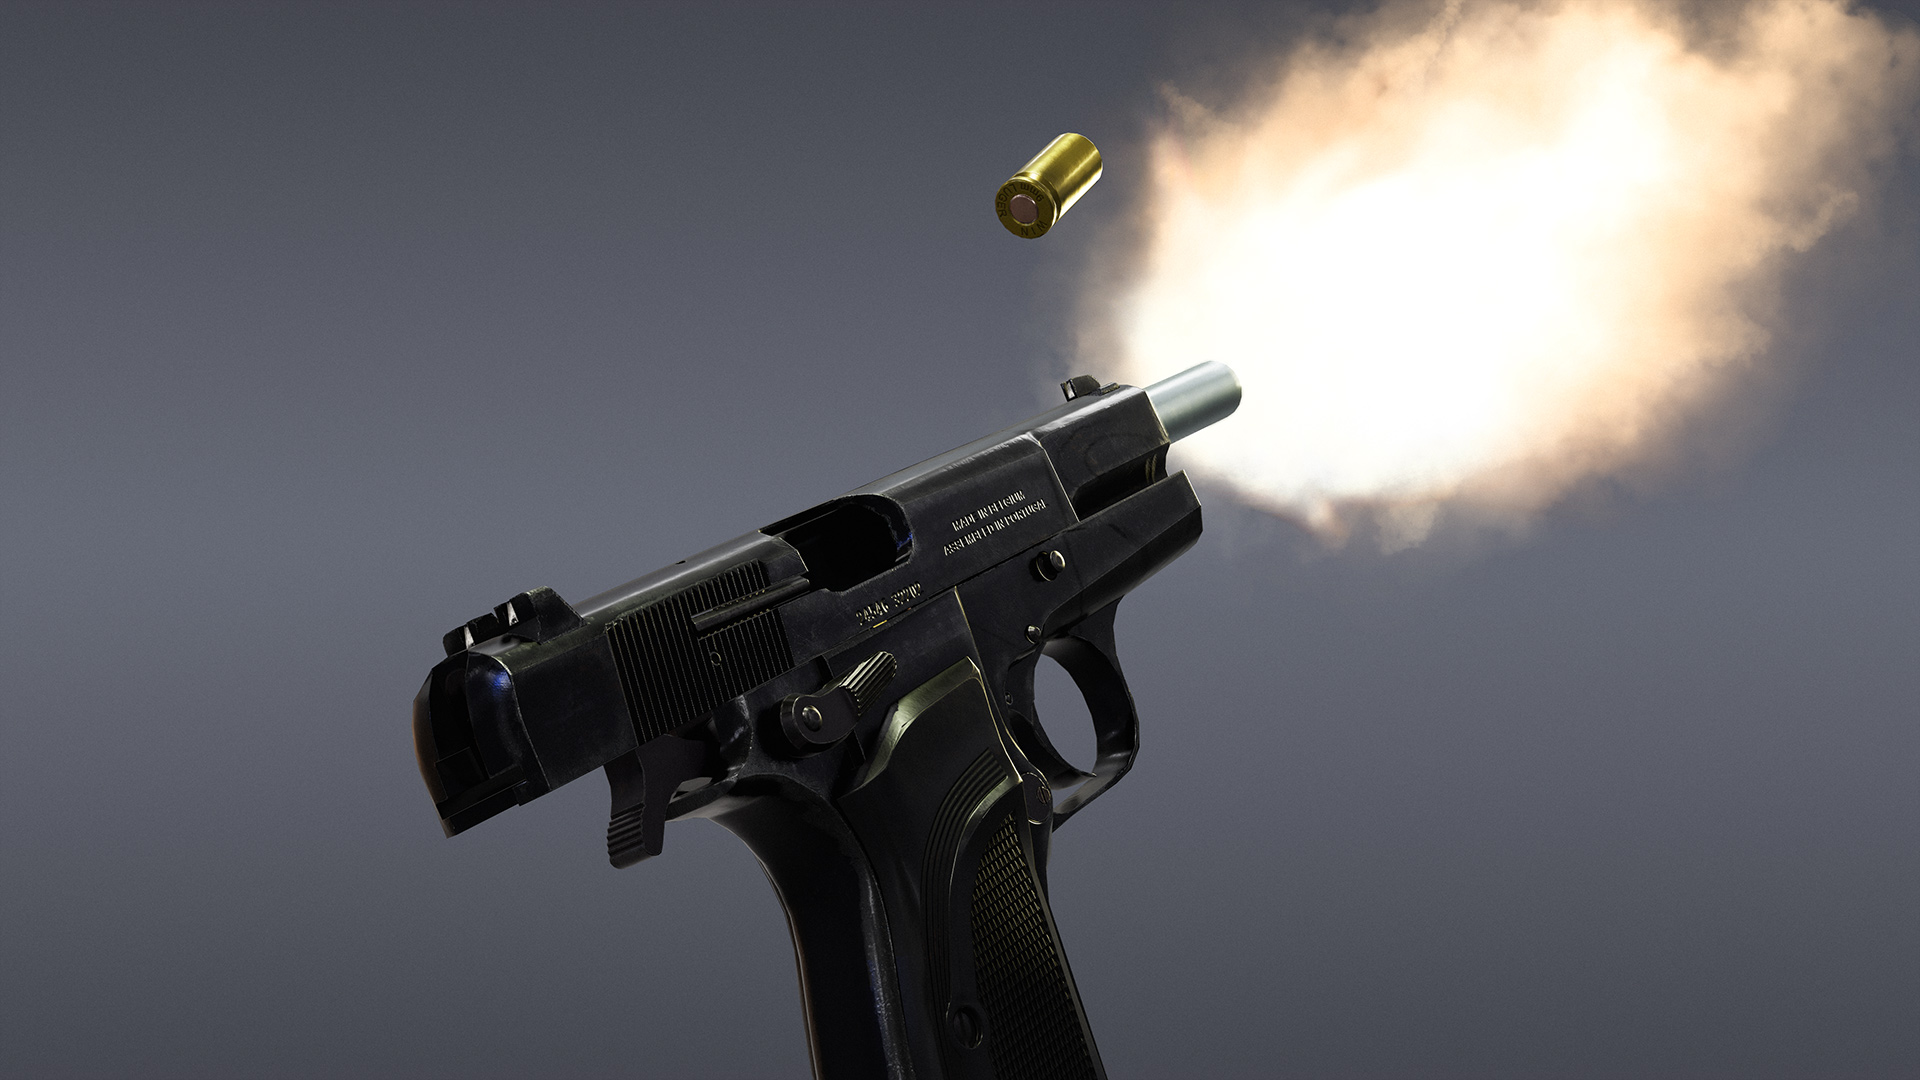 Marmoset render of Browning Hi Power Mark 3 Model Firing with empty case ejecting from side of weapon.